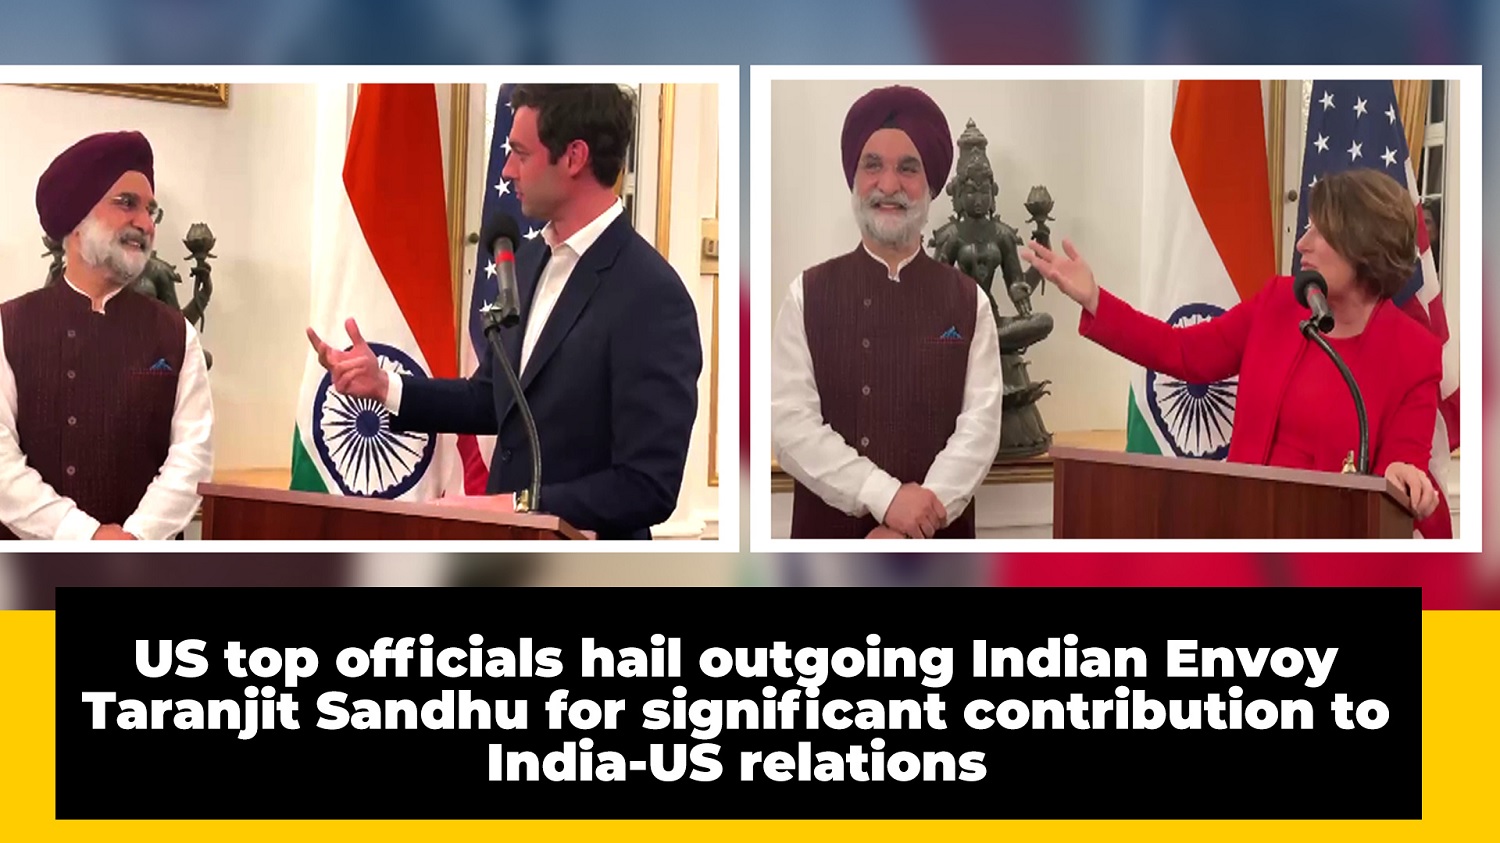 US officials hail outgoing Indian Envoy Taranjit Sandhu for his contribution to India-US ties